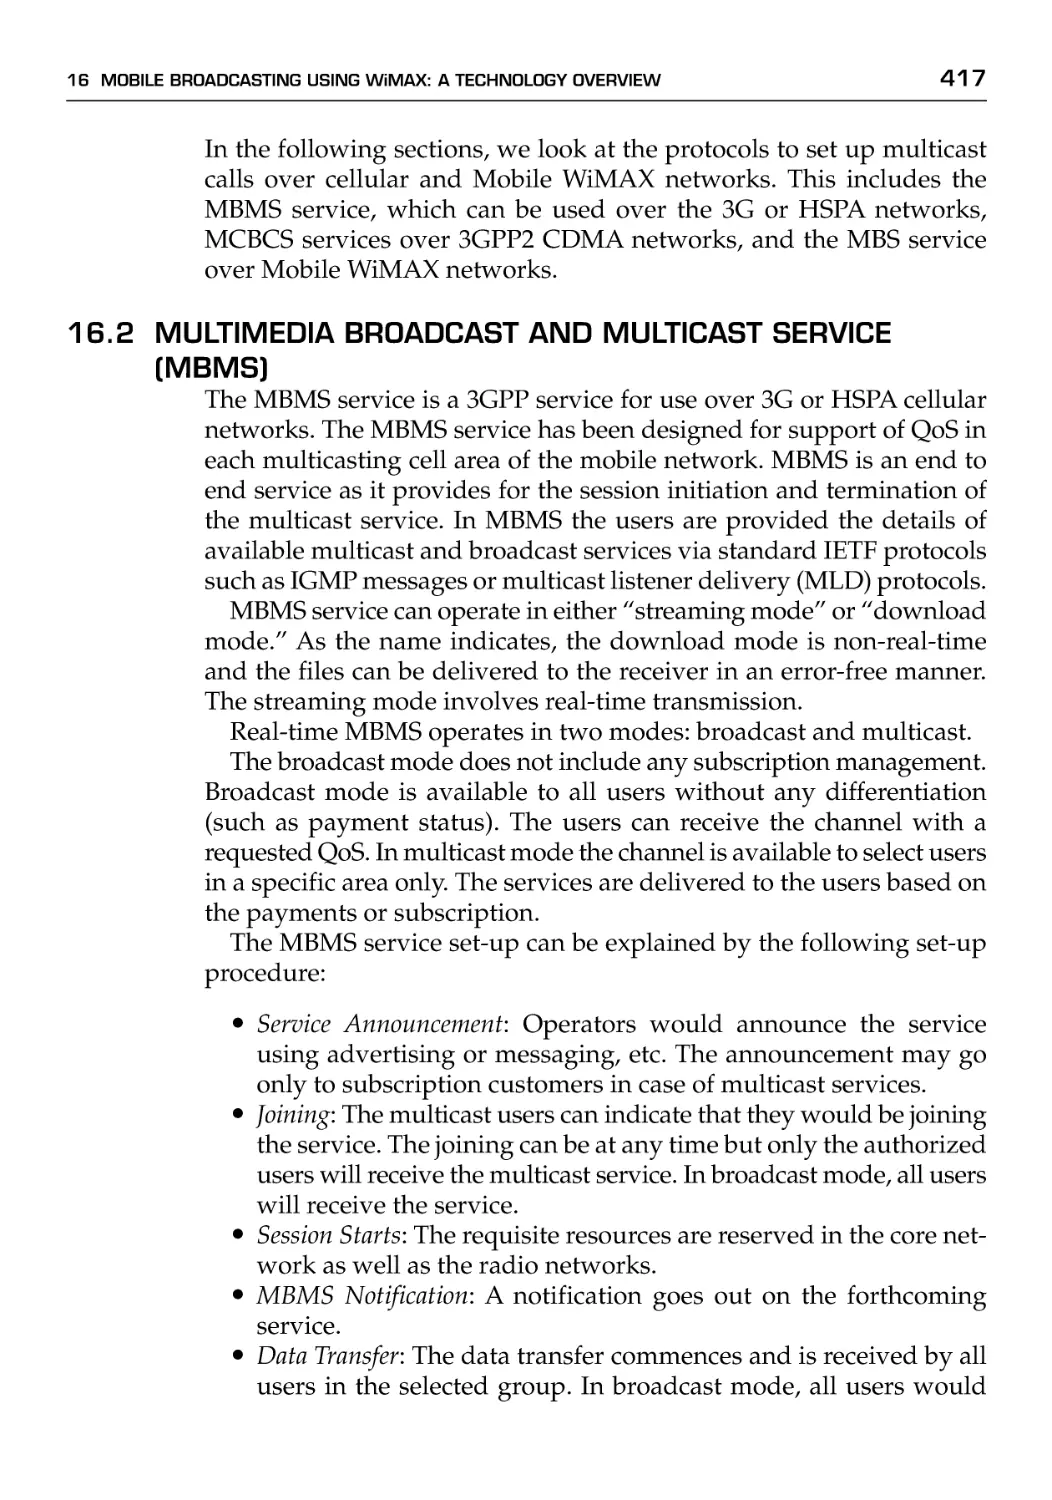 16.2 Multimedia Broadcast and Multicast Service (MBMS)